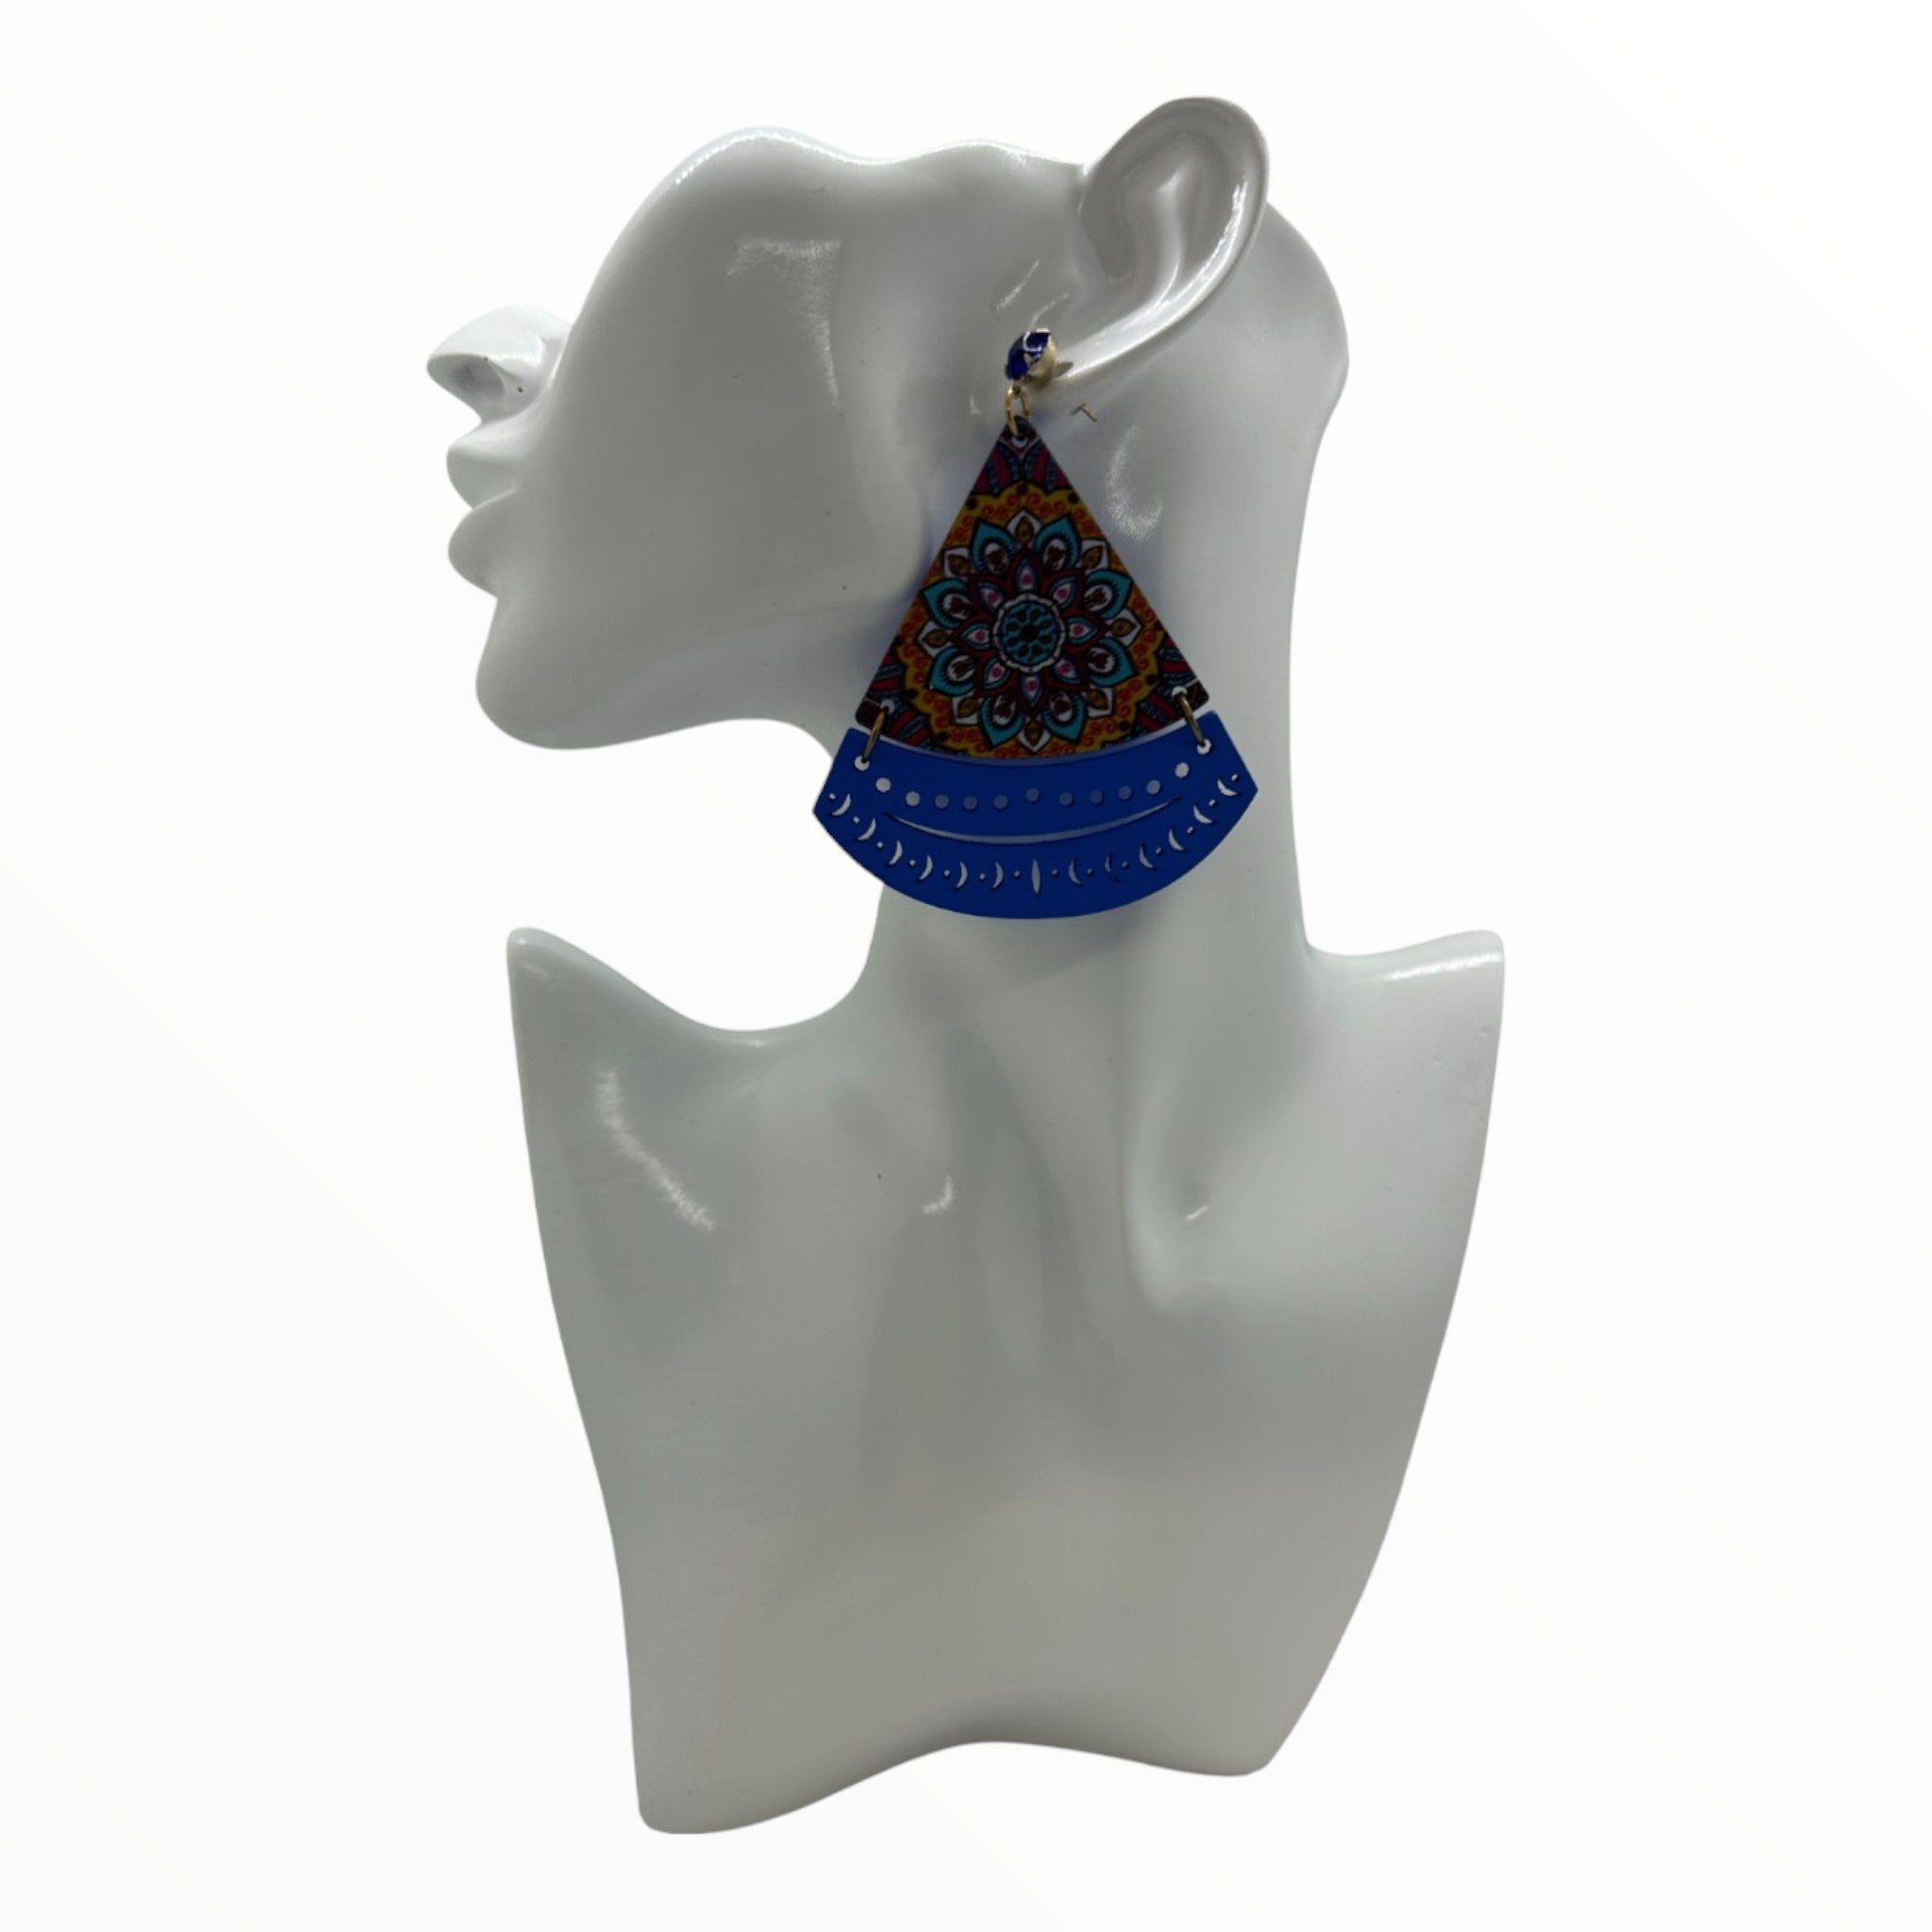 Afrocentric Floral Triangular Earrings (Blue)